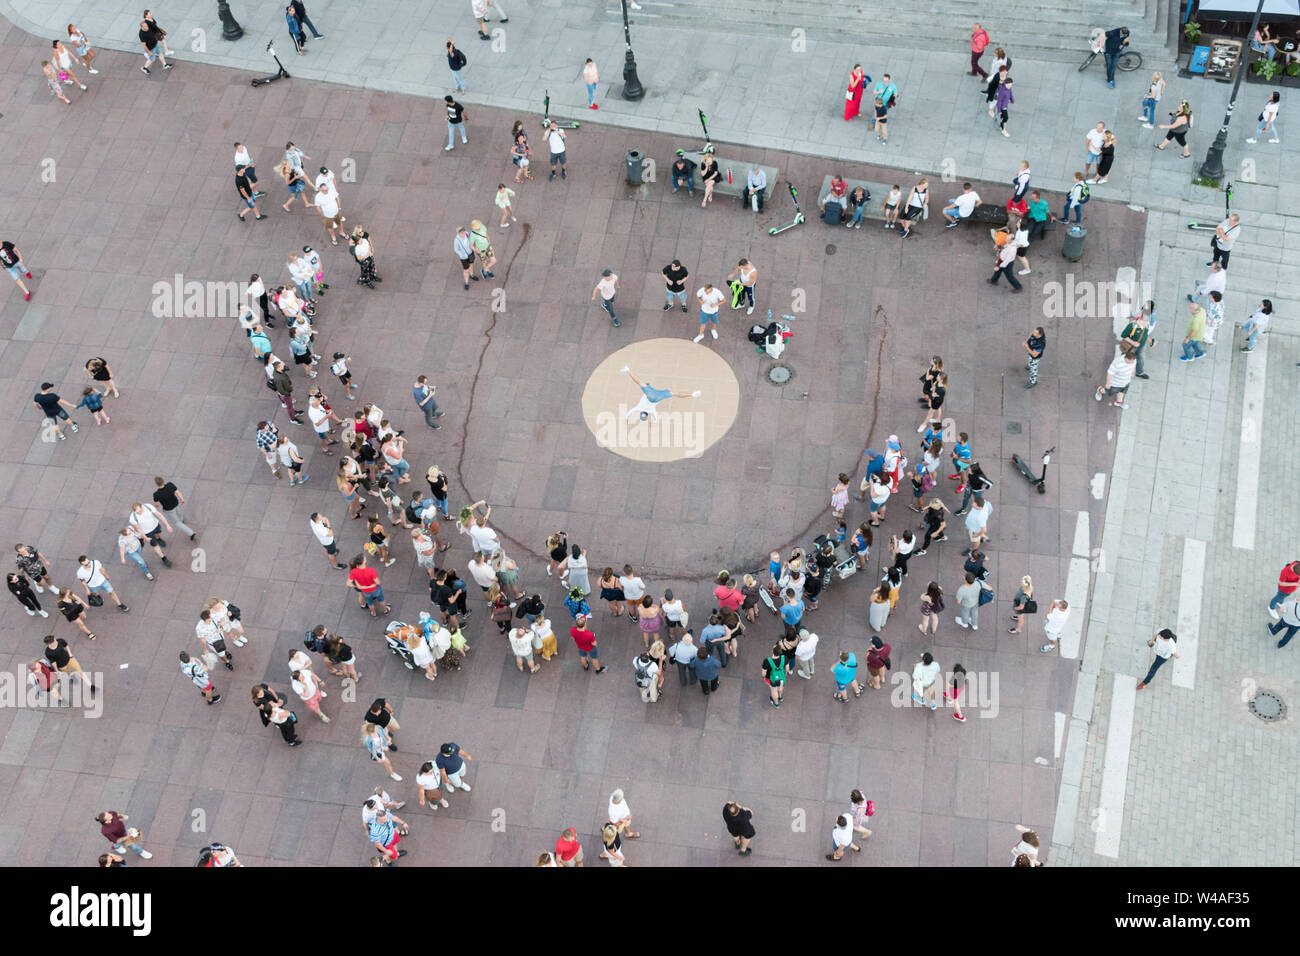 A crowd gathers in a pedestrianised area near Castle Square in Warsaw, Poland, as a street performer performs acrobatics on his hands. Stock Photo